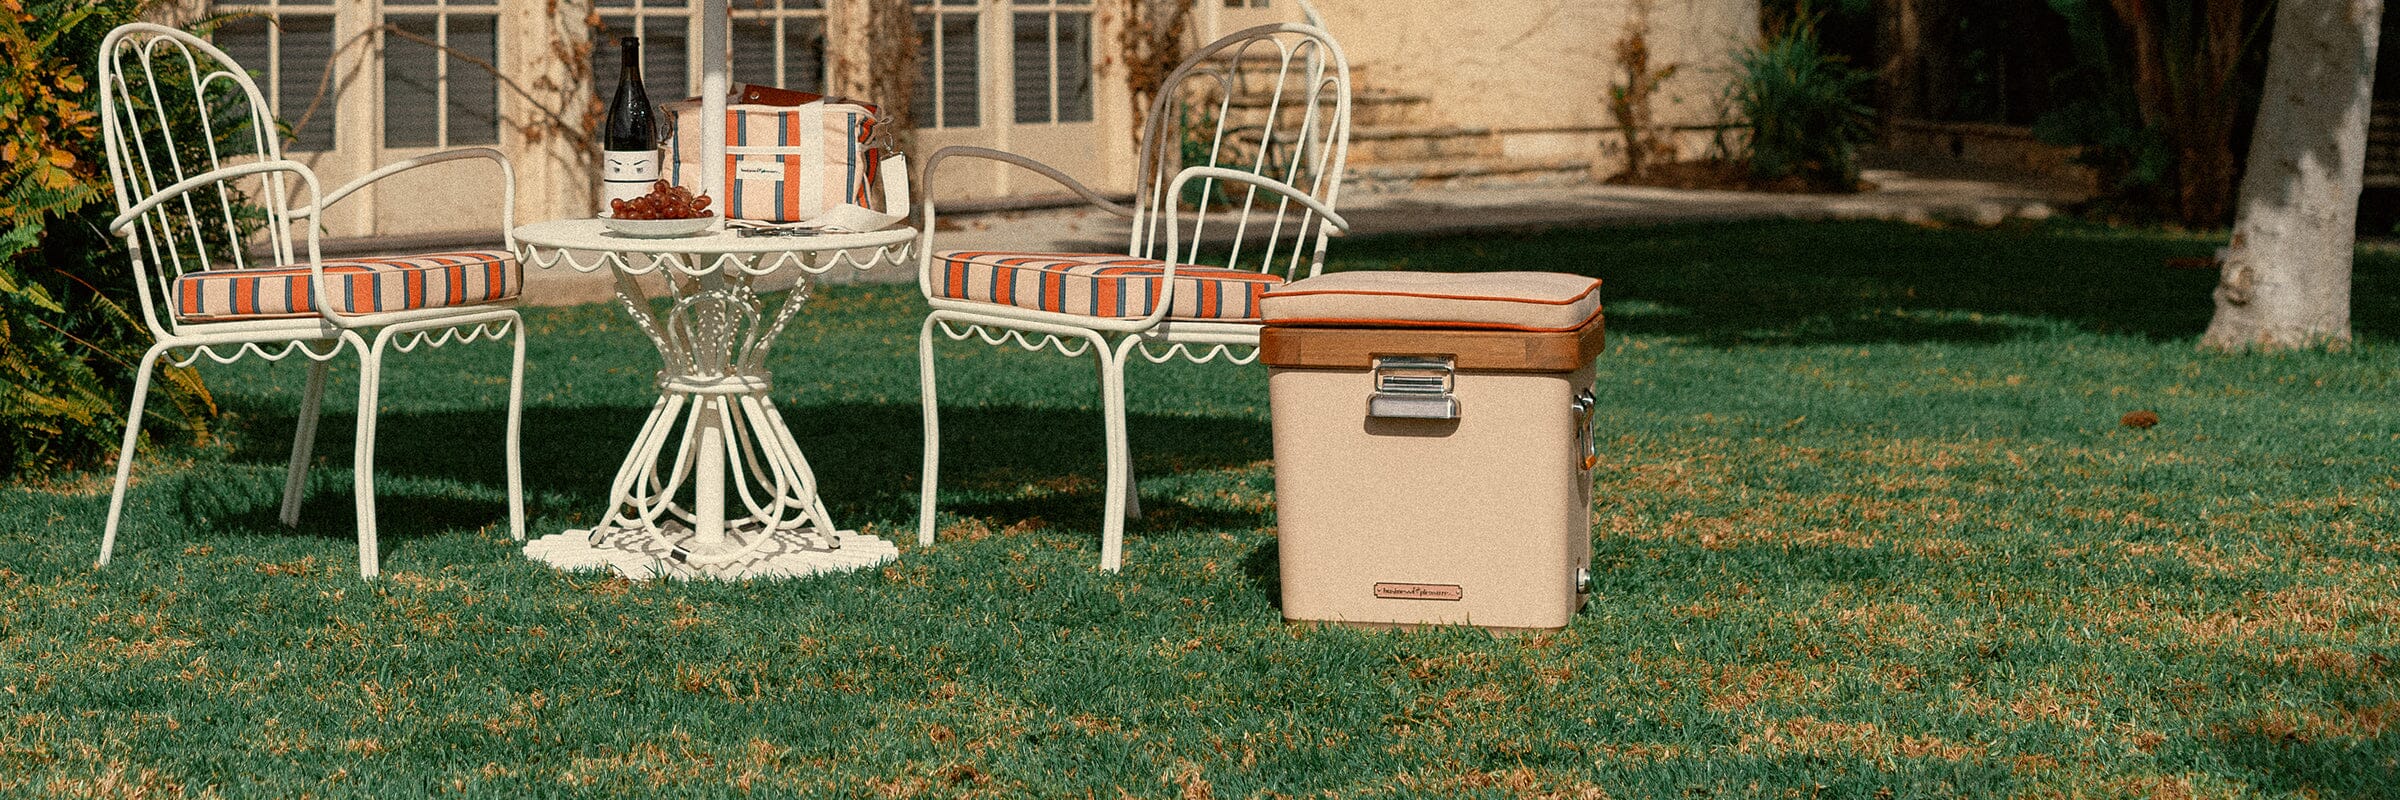 The Small Hemingway Cooler